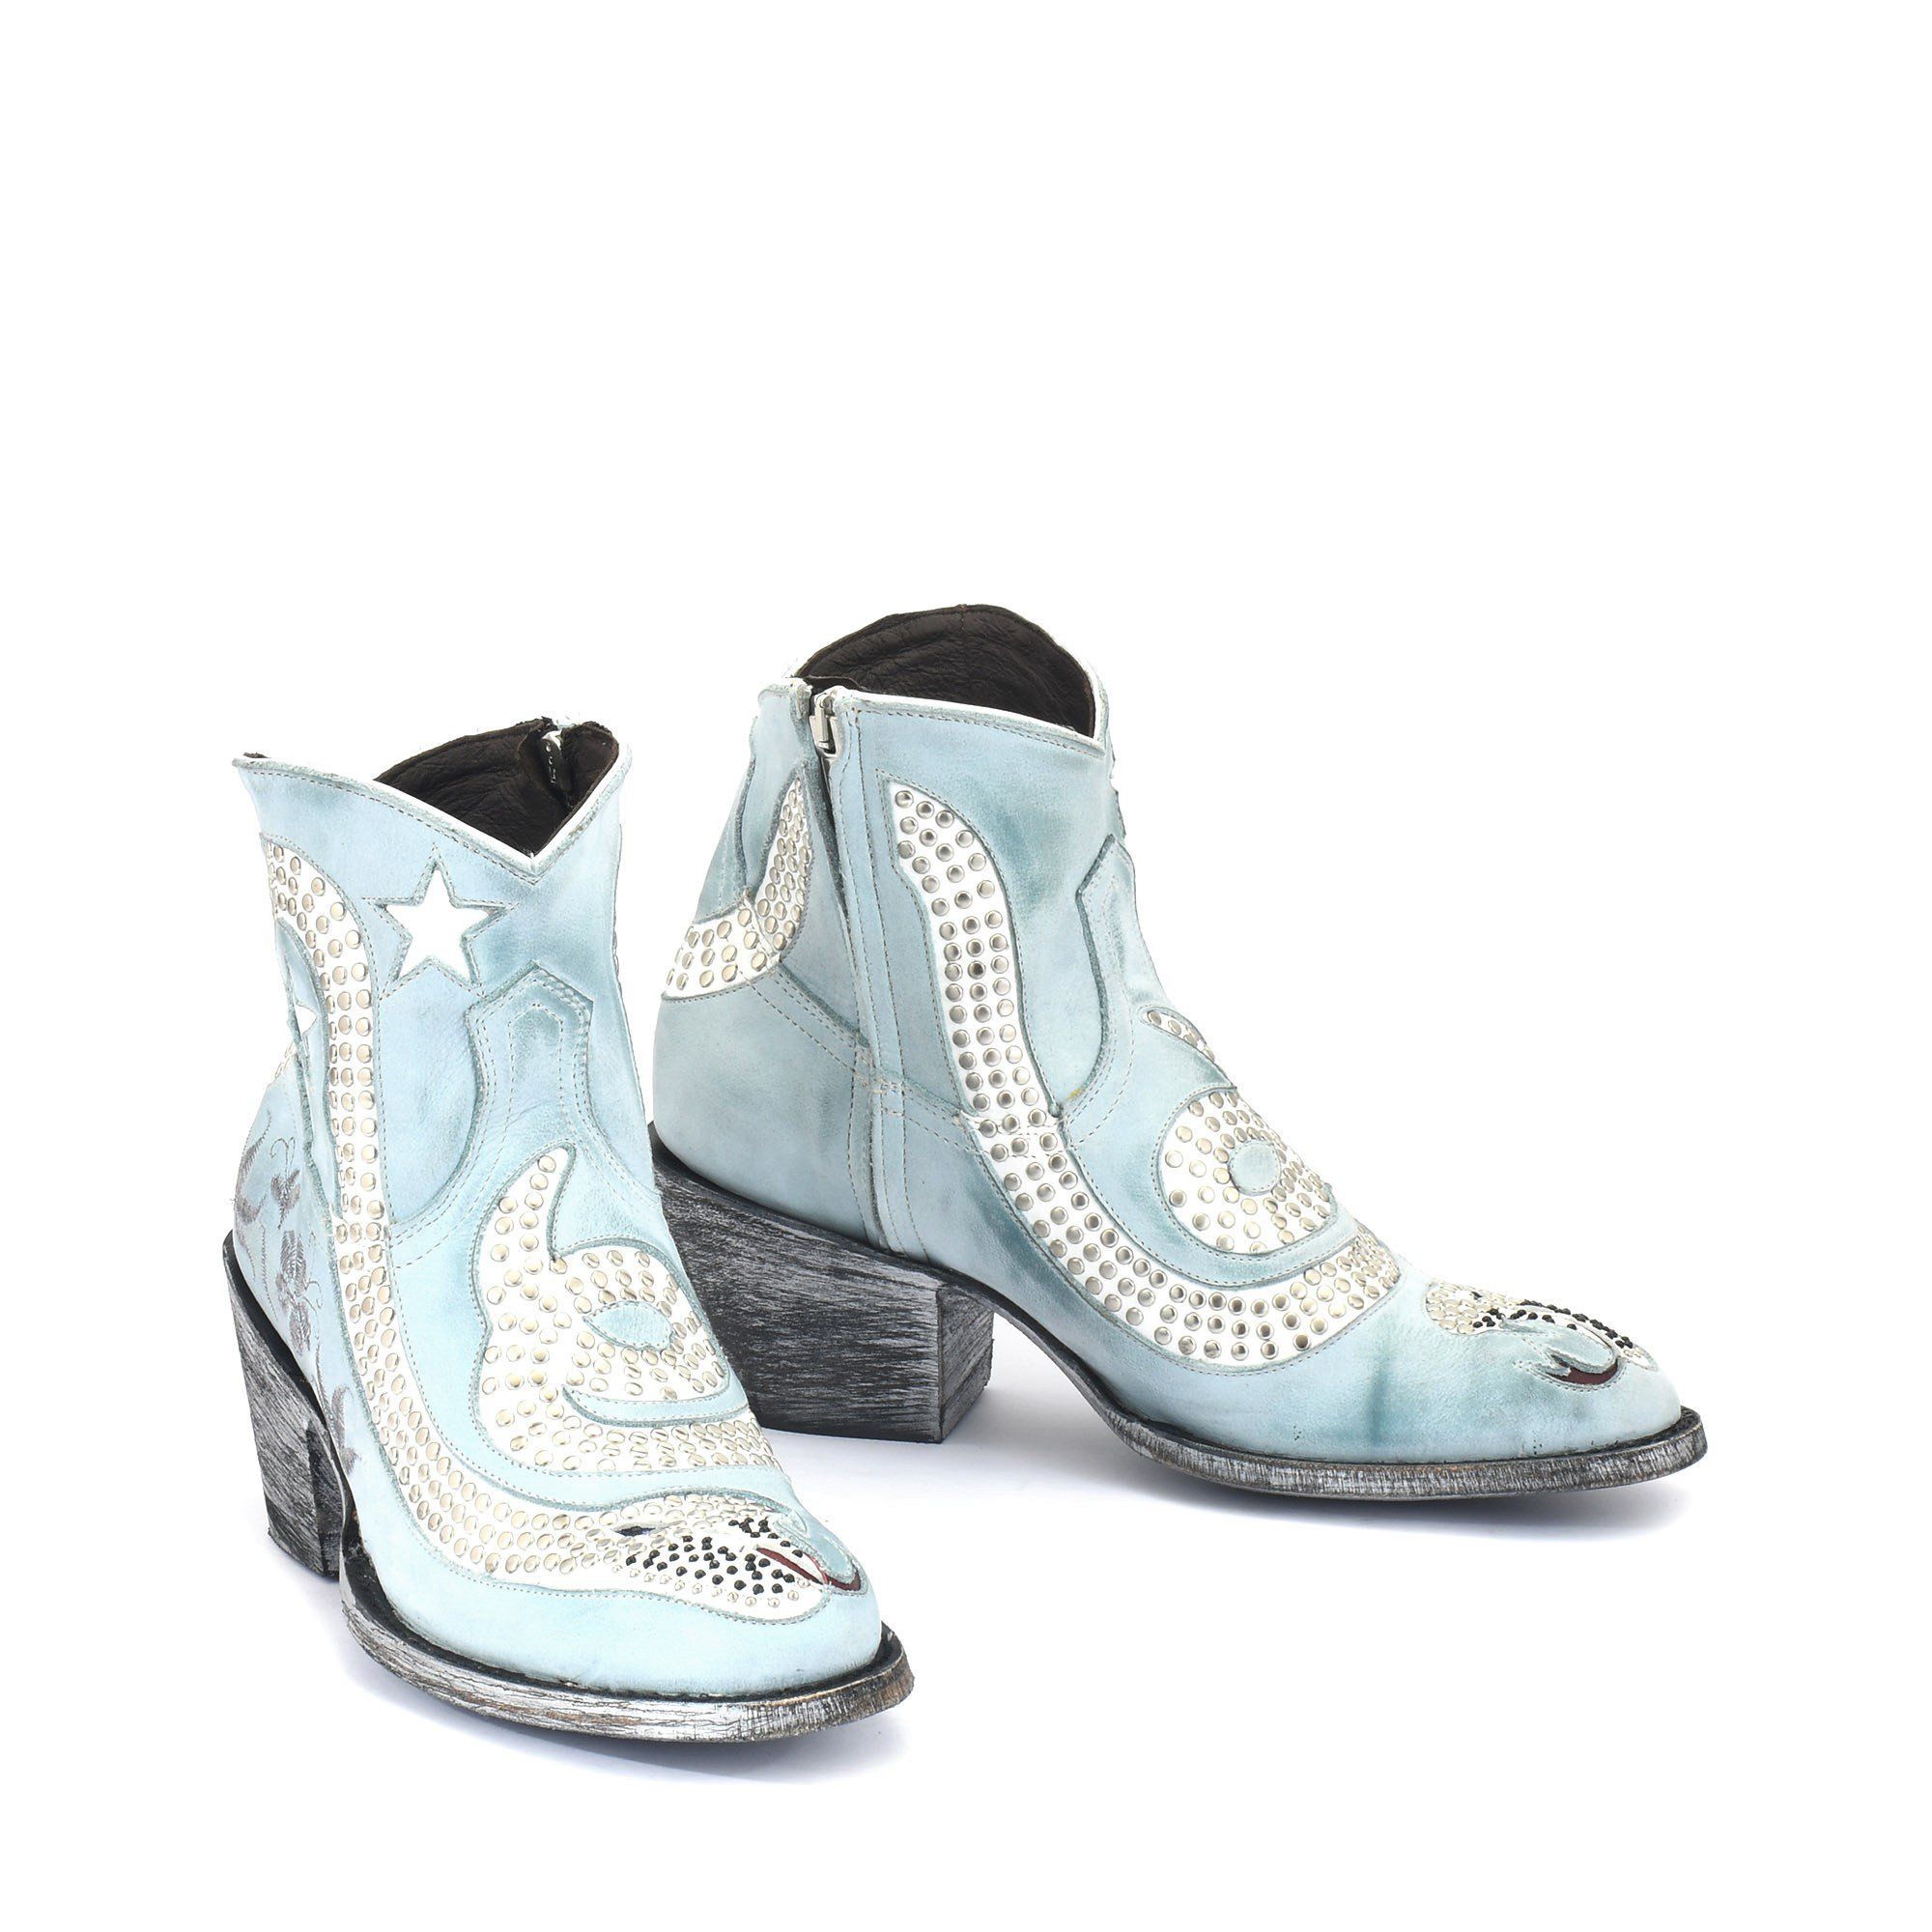 CORIUS SNAKE BLUE SKY ROUNDED TOE ANKLE BOOTS WITH  STUDS  AND SNAKE OUTCUTS   Total heel height 2.6 Inches  100% cow leather  C